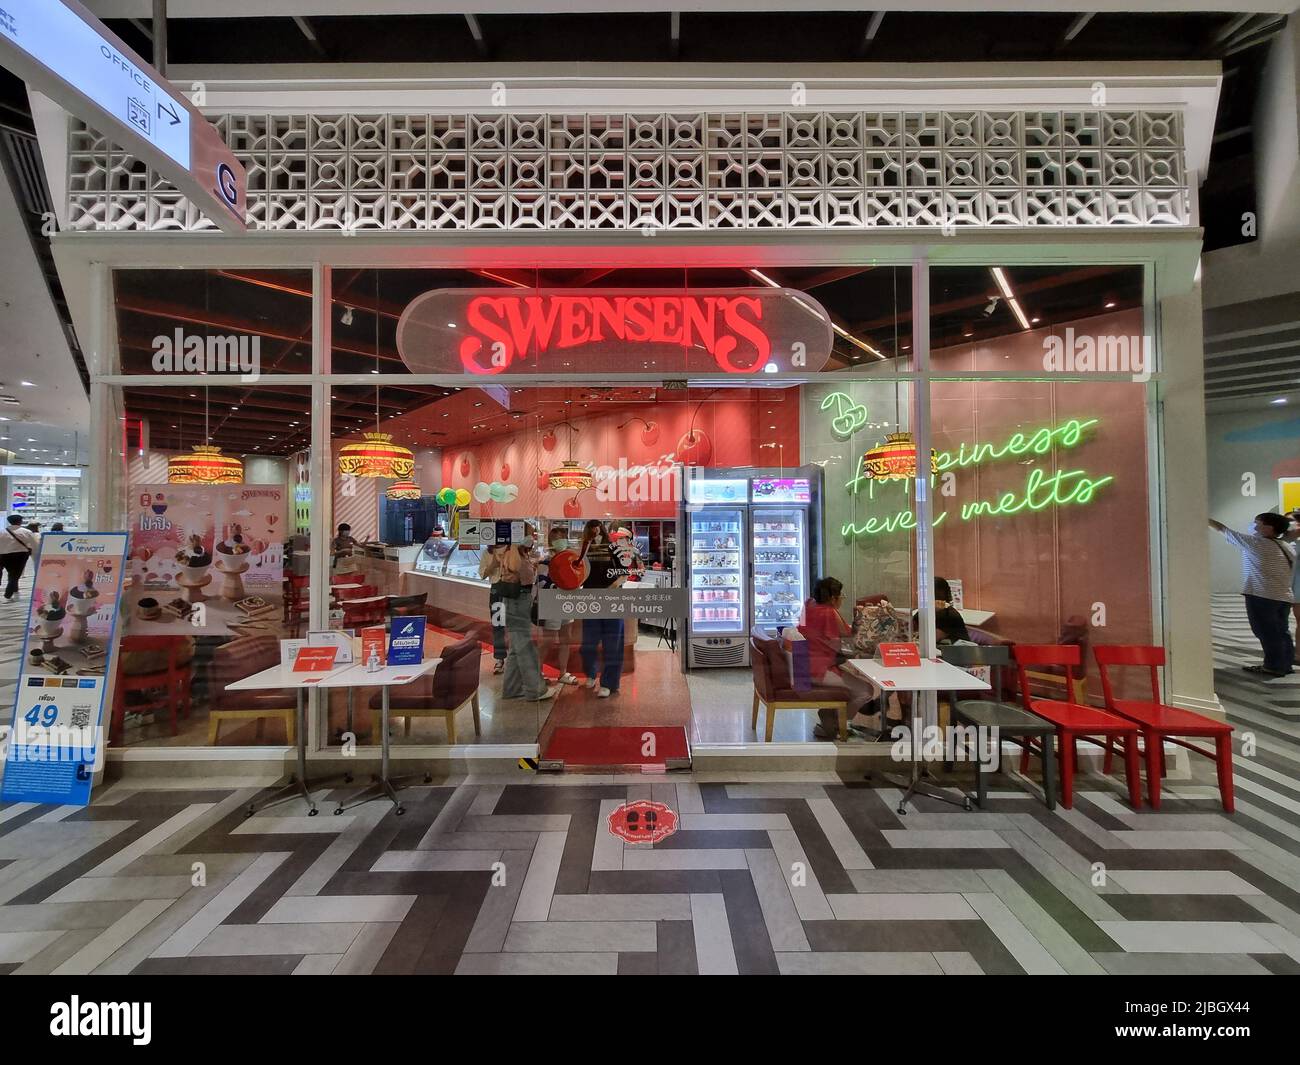 Swensens icre cream store at shopping mall Stock Photo